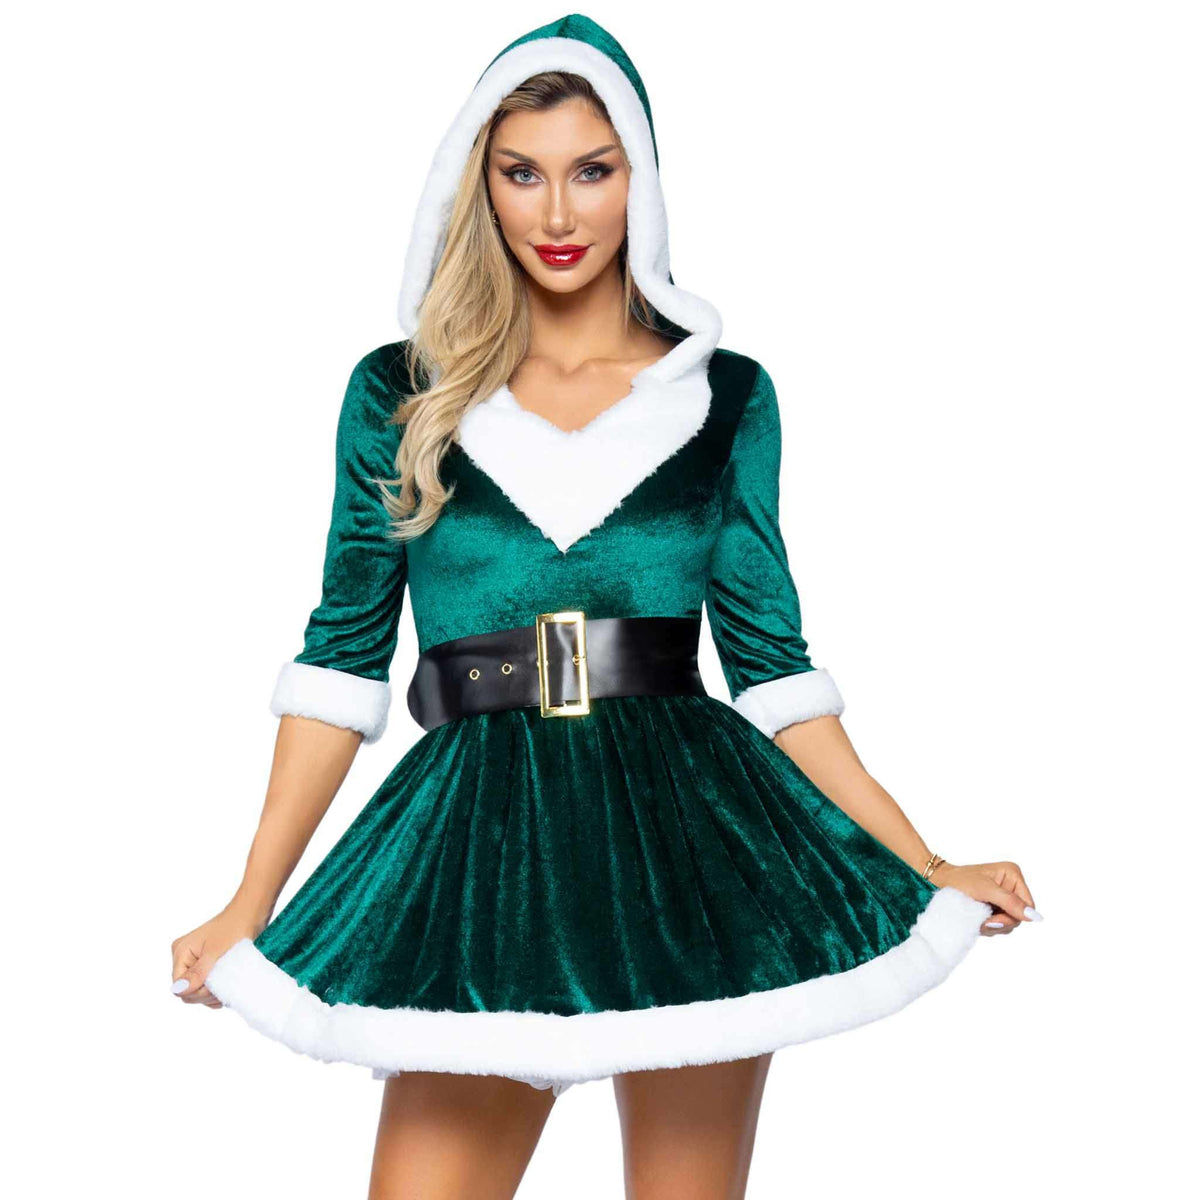 Mrs. Claus Dress Sexy Adult Christmas Costume